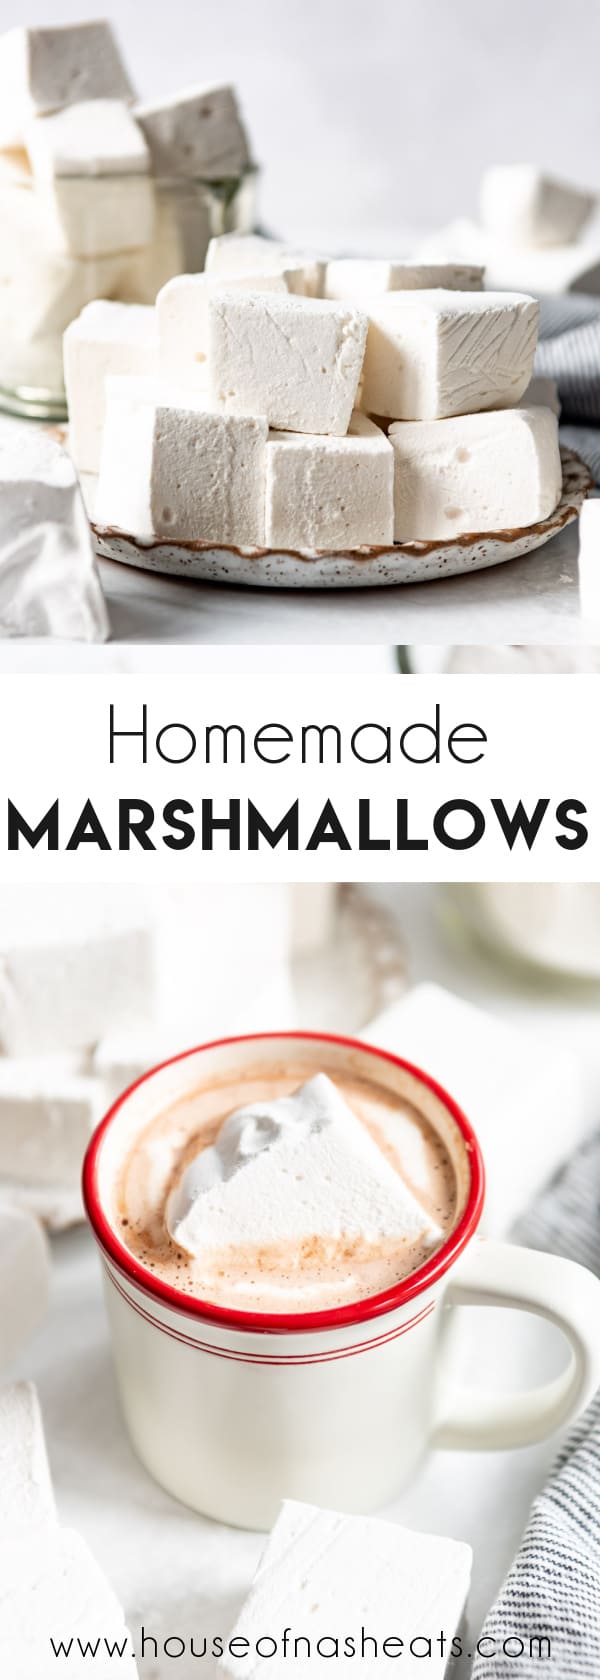 A collage of images of homemade marshmallows with text overlay.